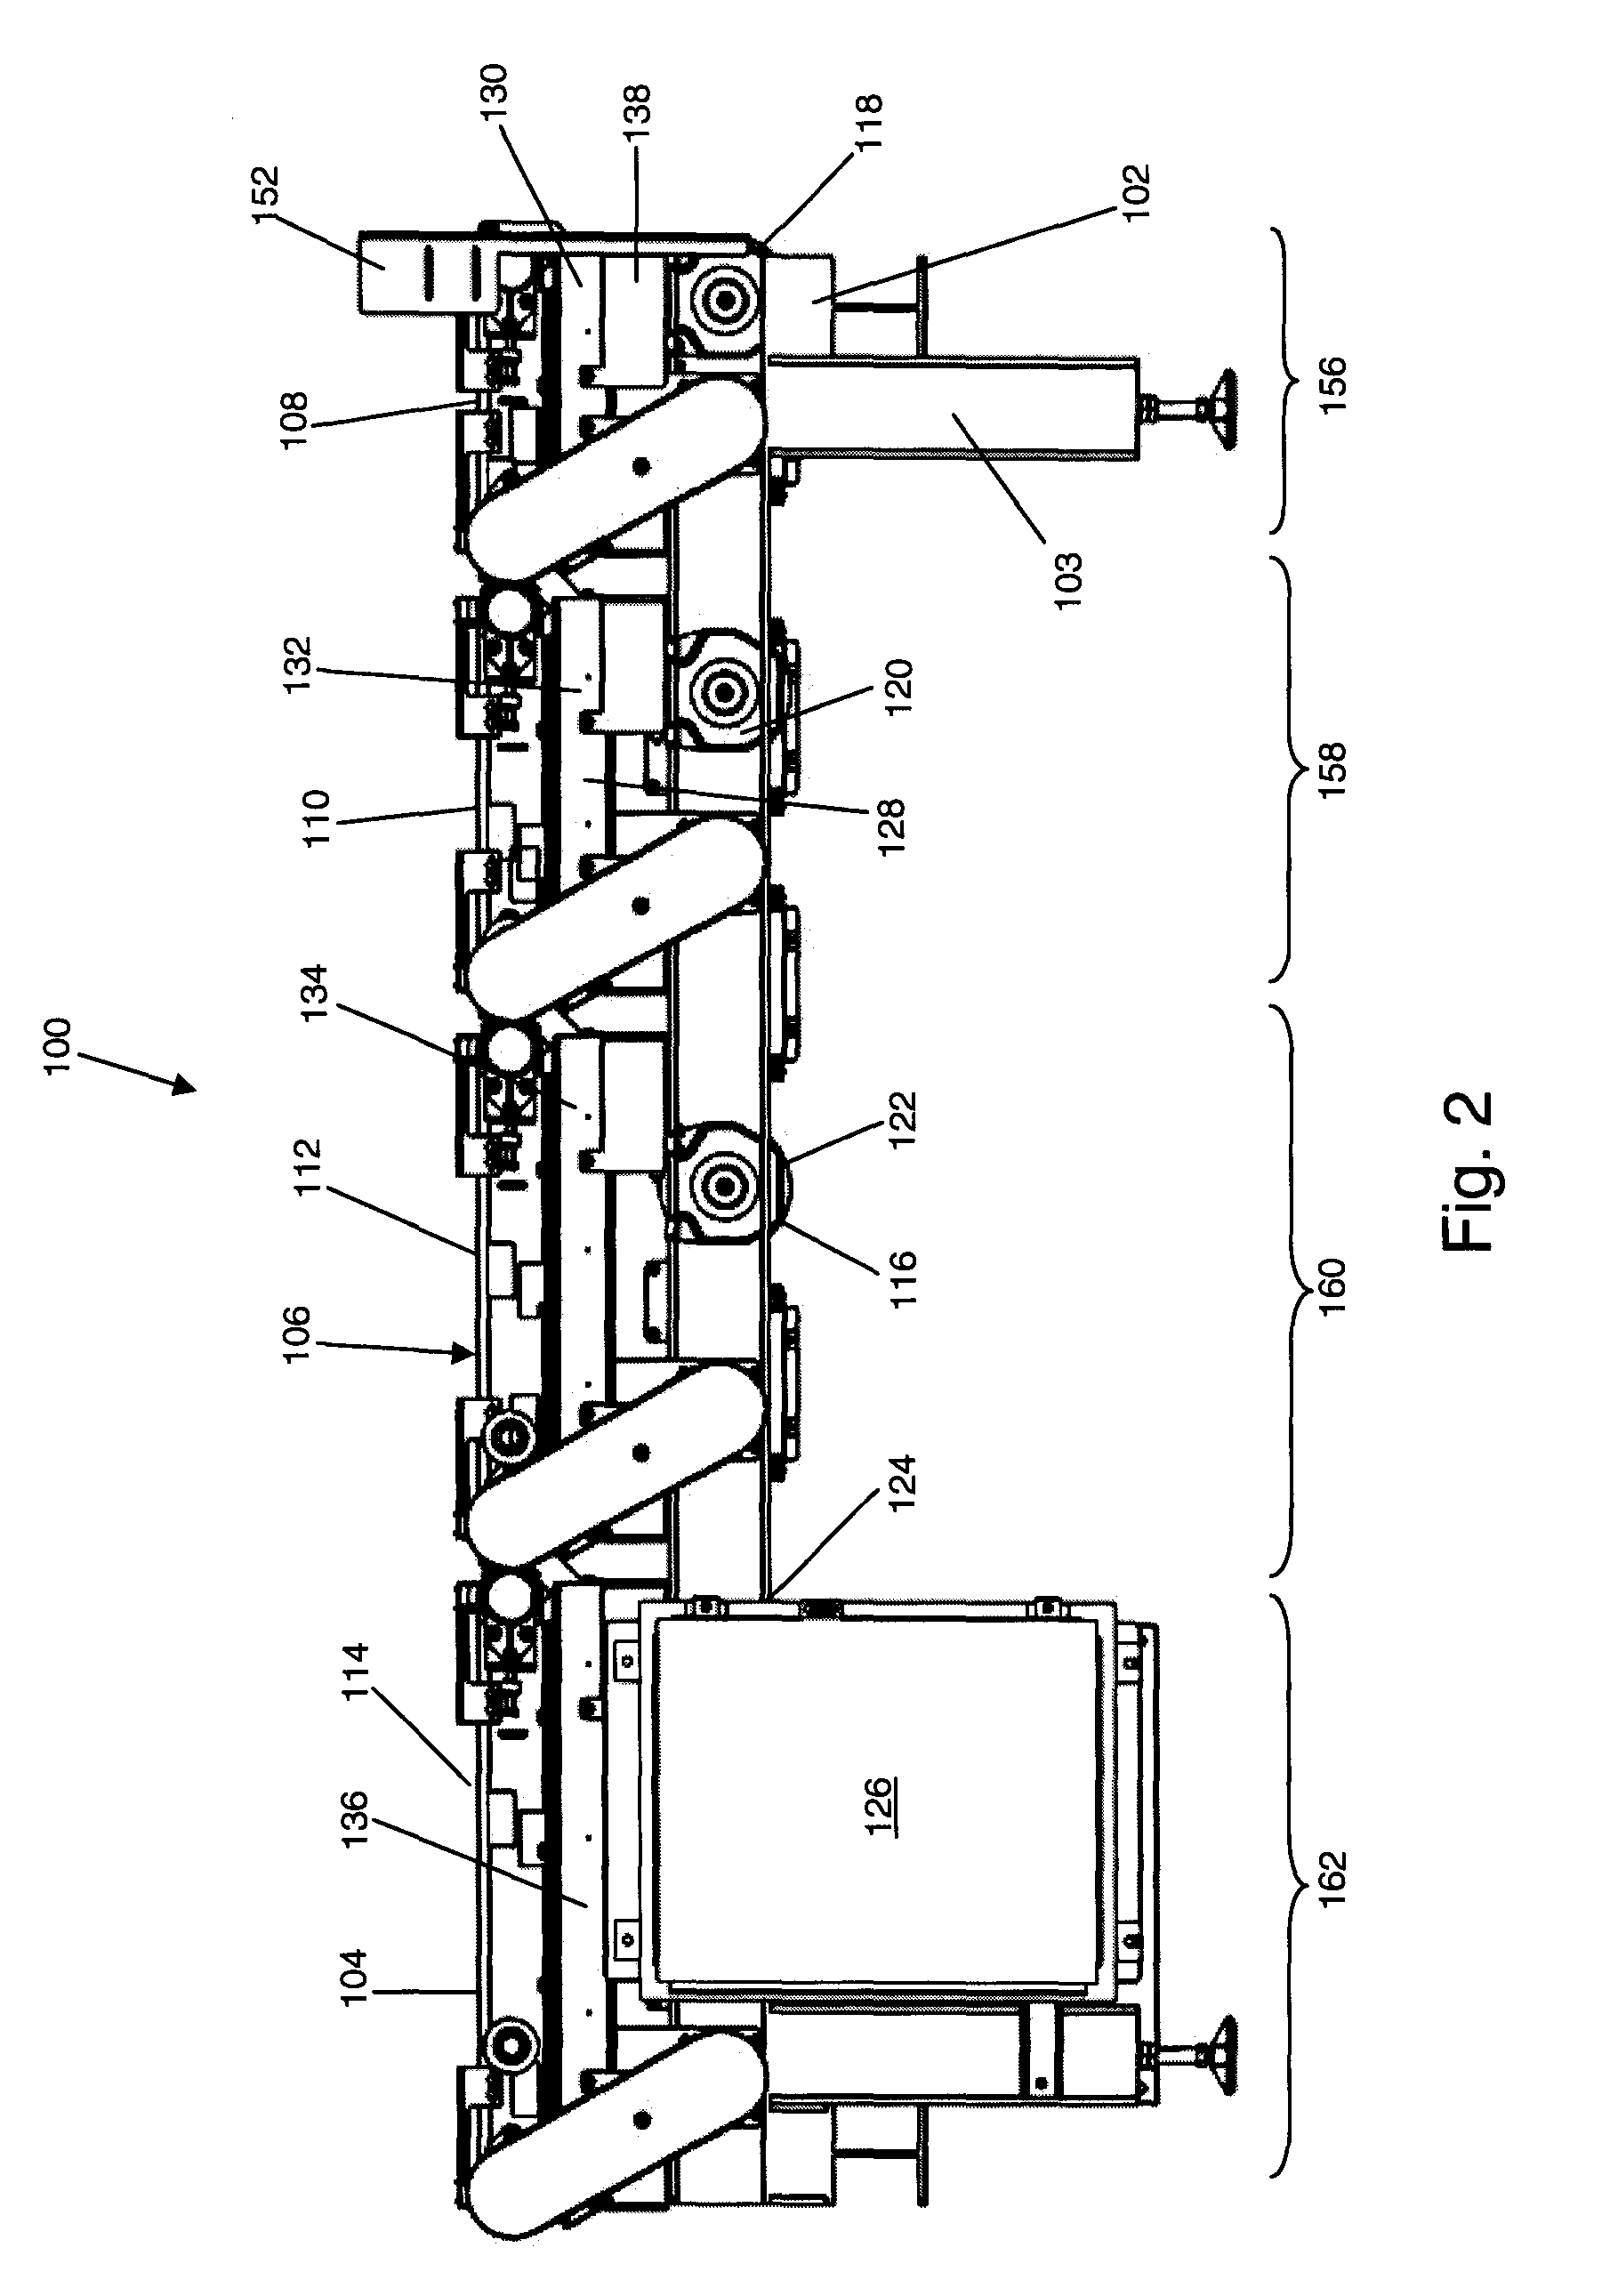 Multiple conveyor and scale weighing apparatus